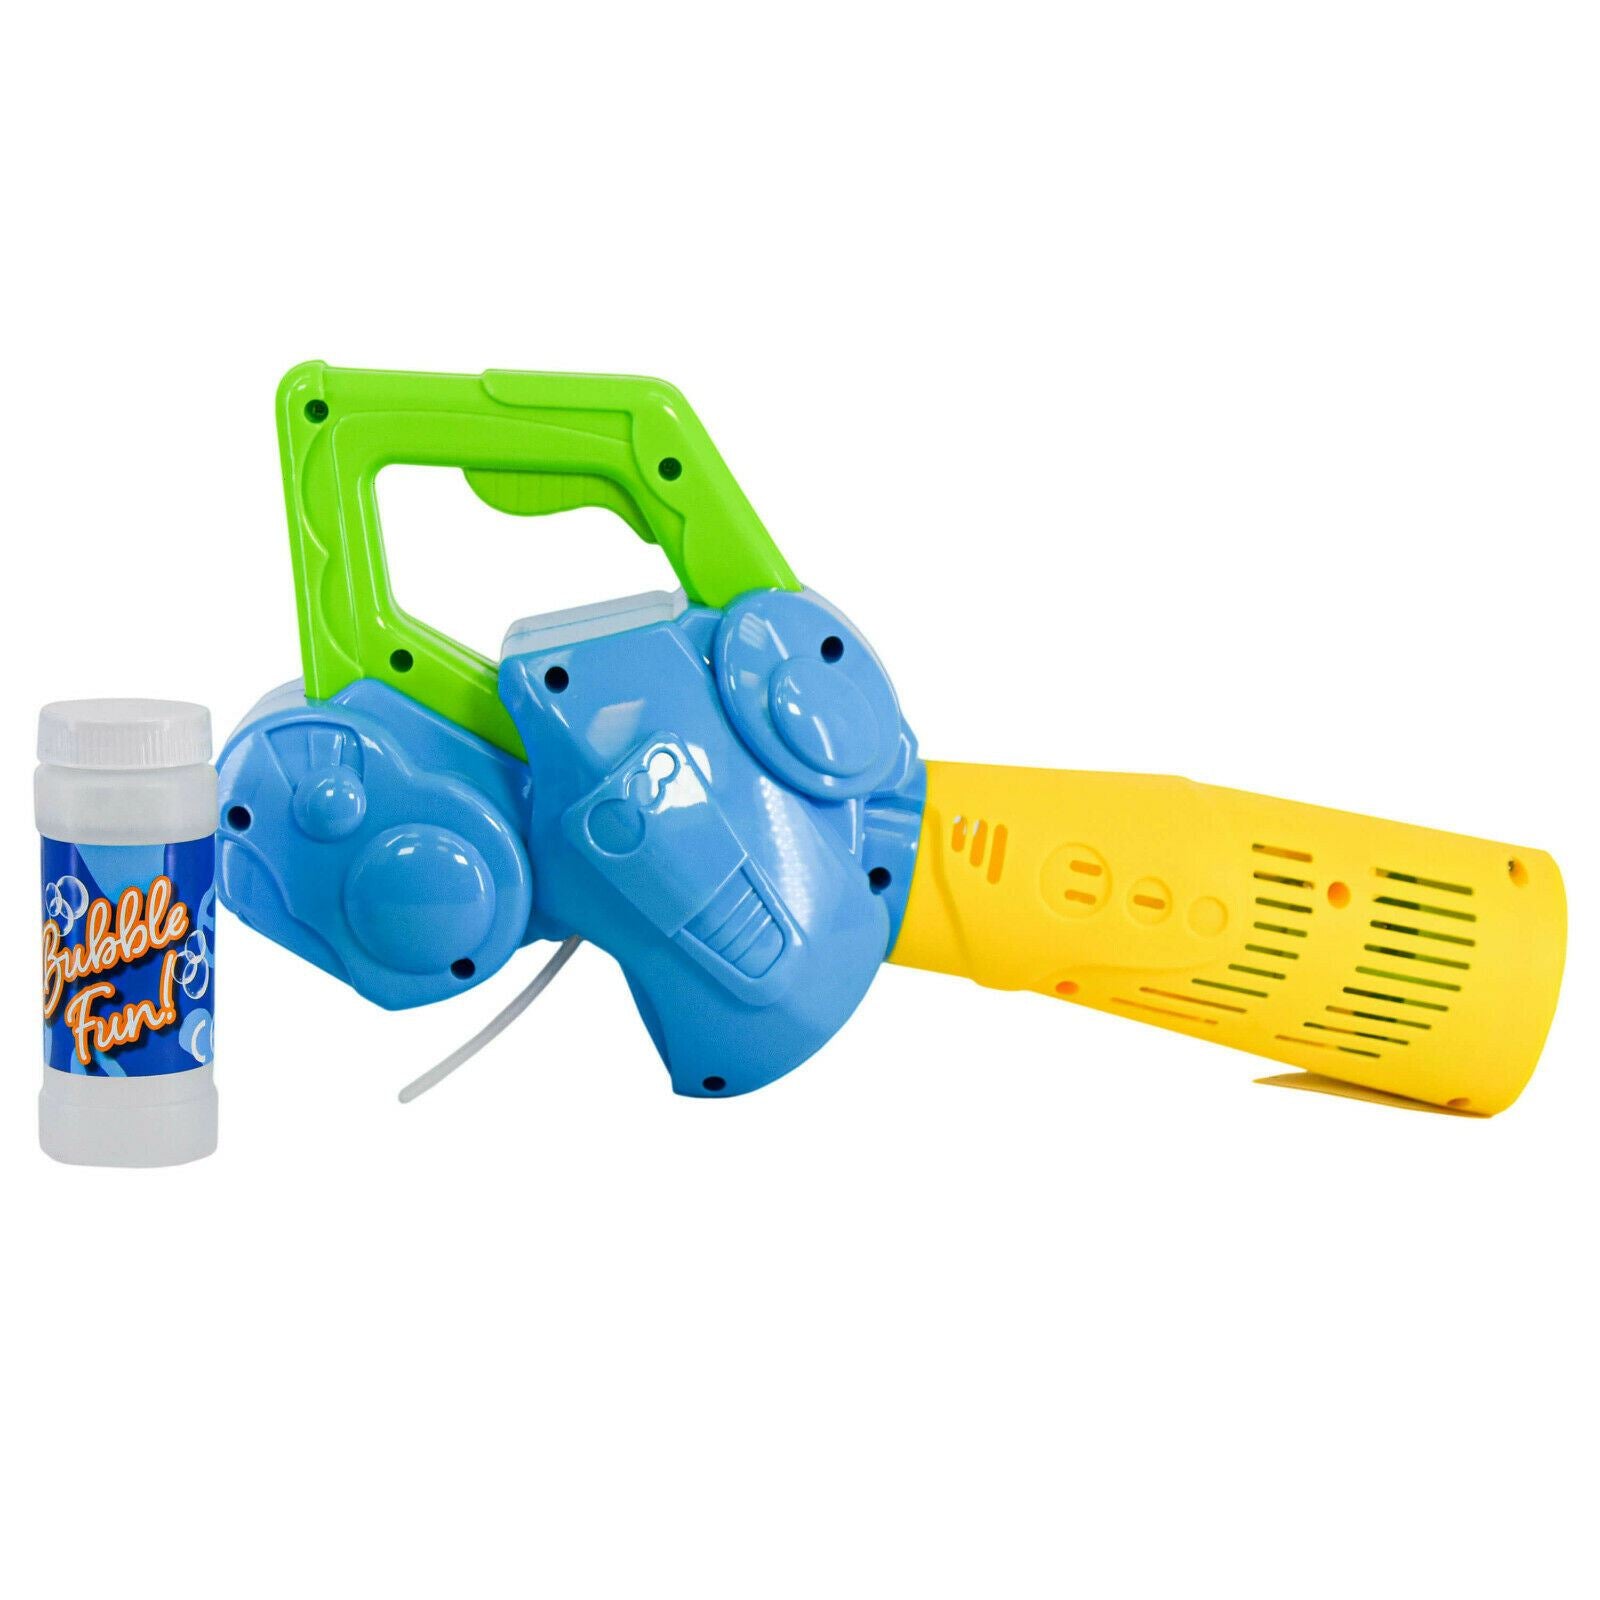 Bubble Leaf Blowing Gun for Kids by The Magic Toy Shop - UKBuyZone